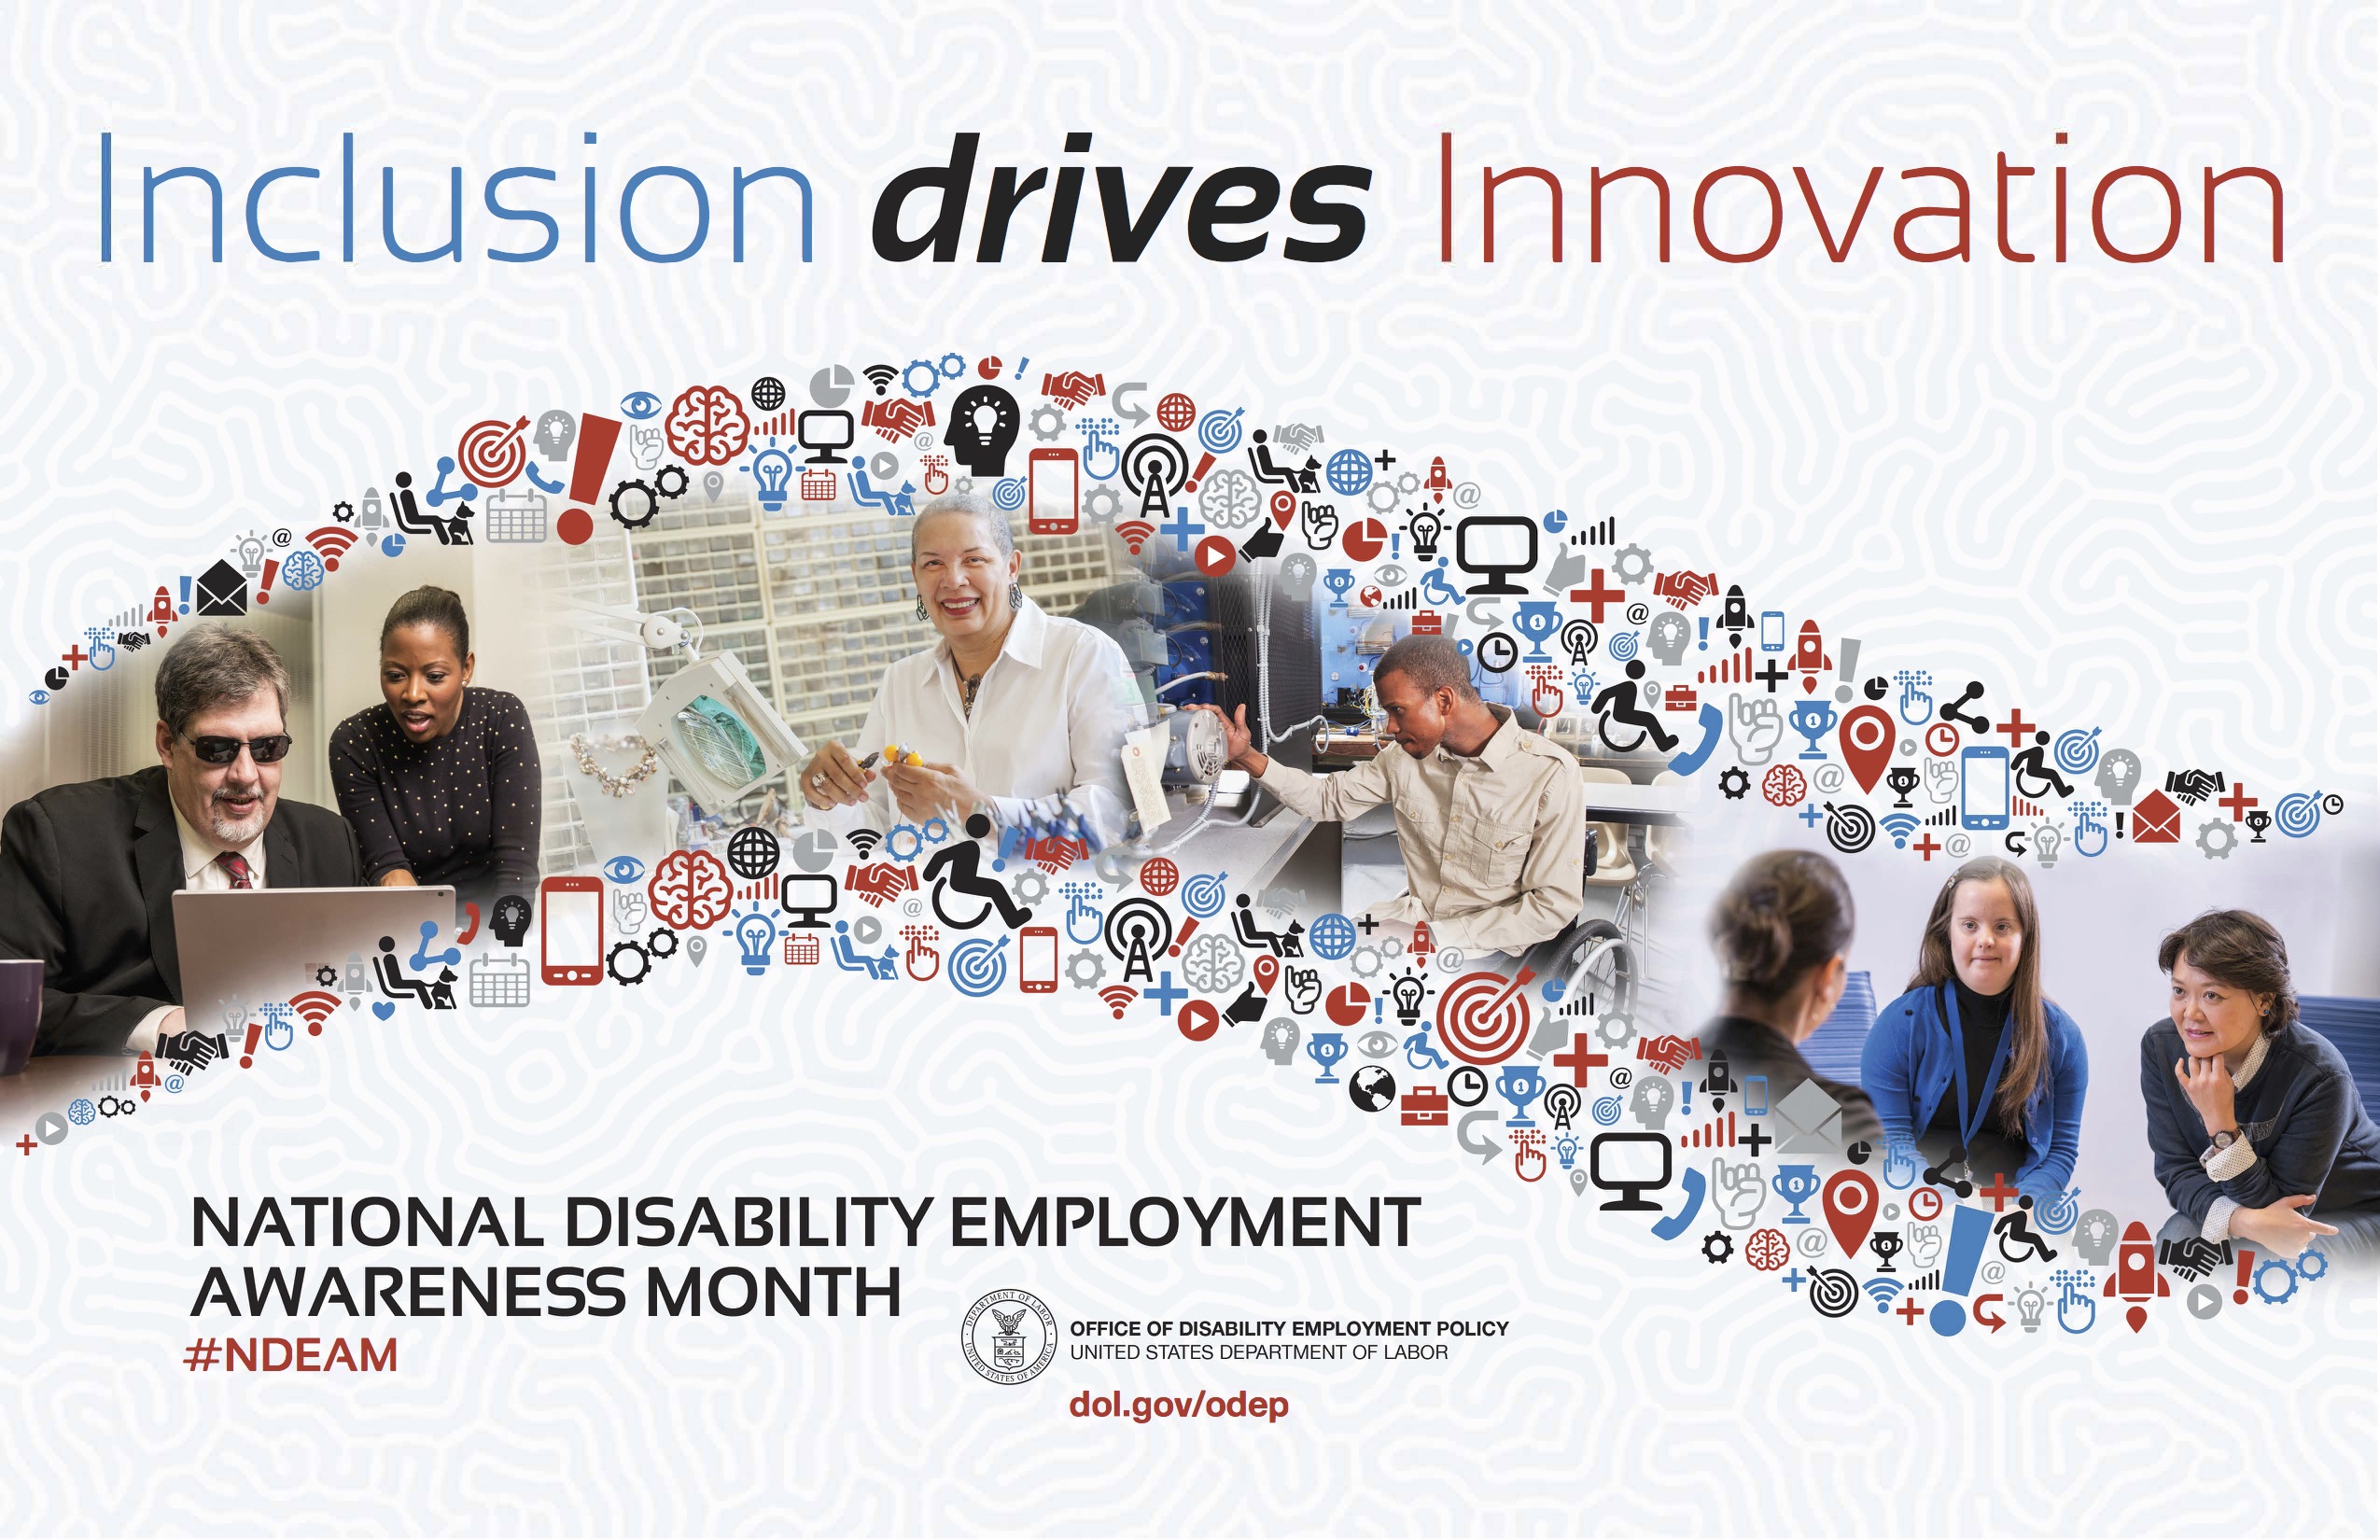 hiring people with disabilities event 10/27 at 3 pm